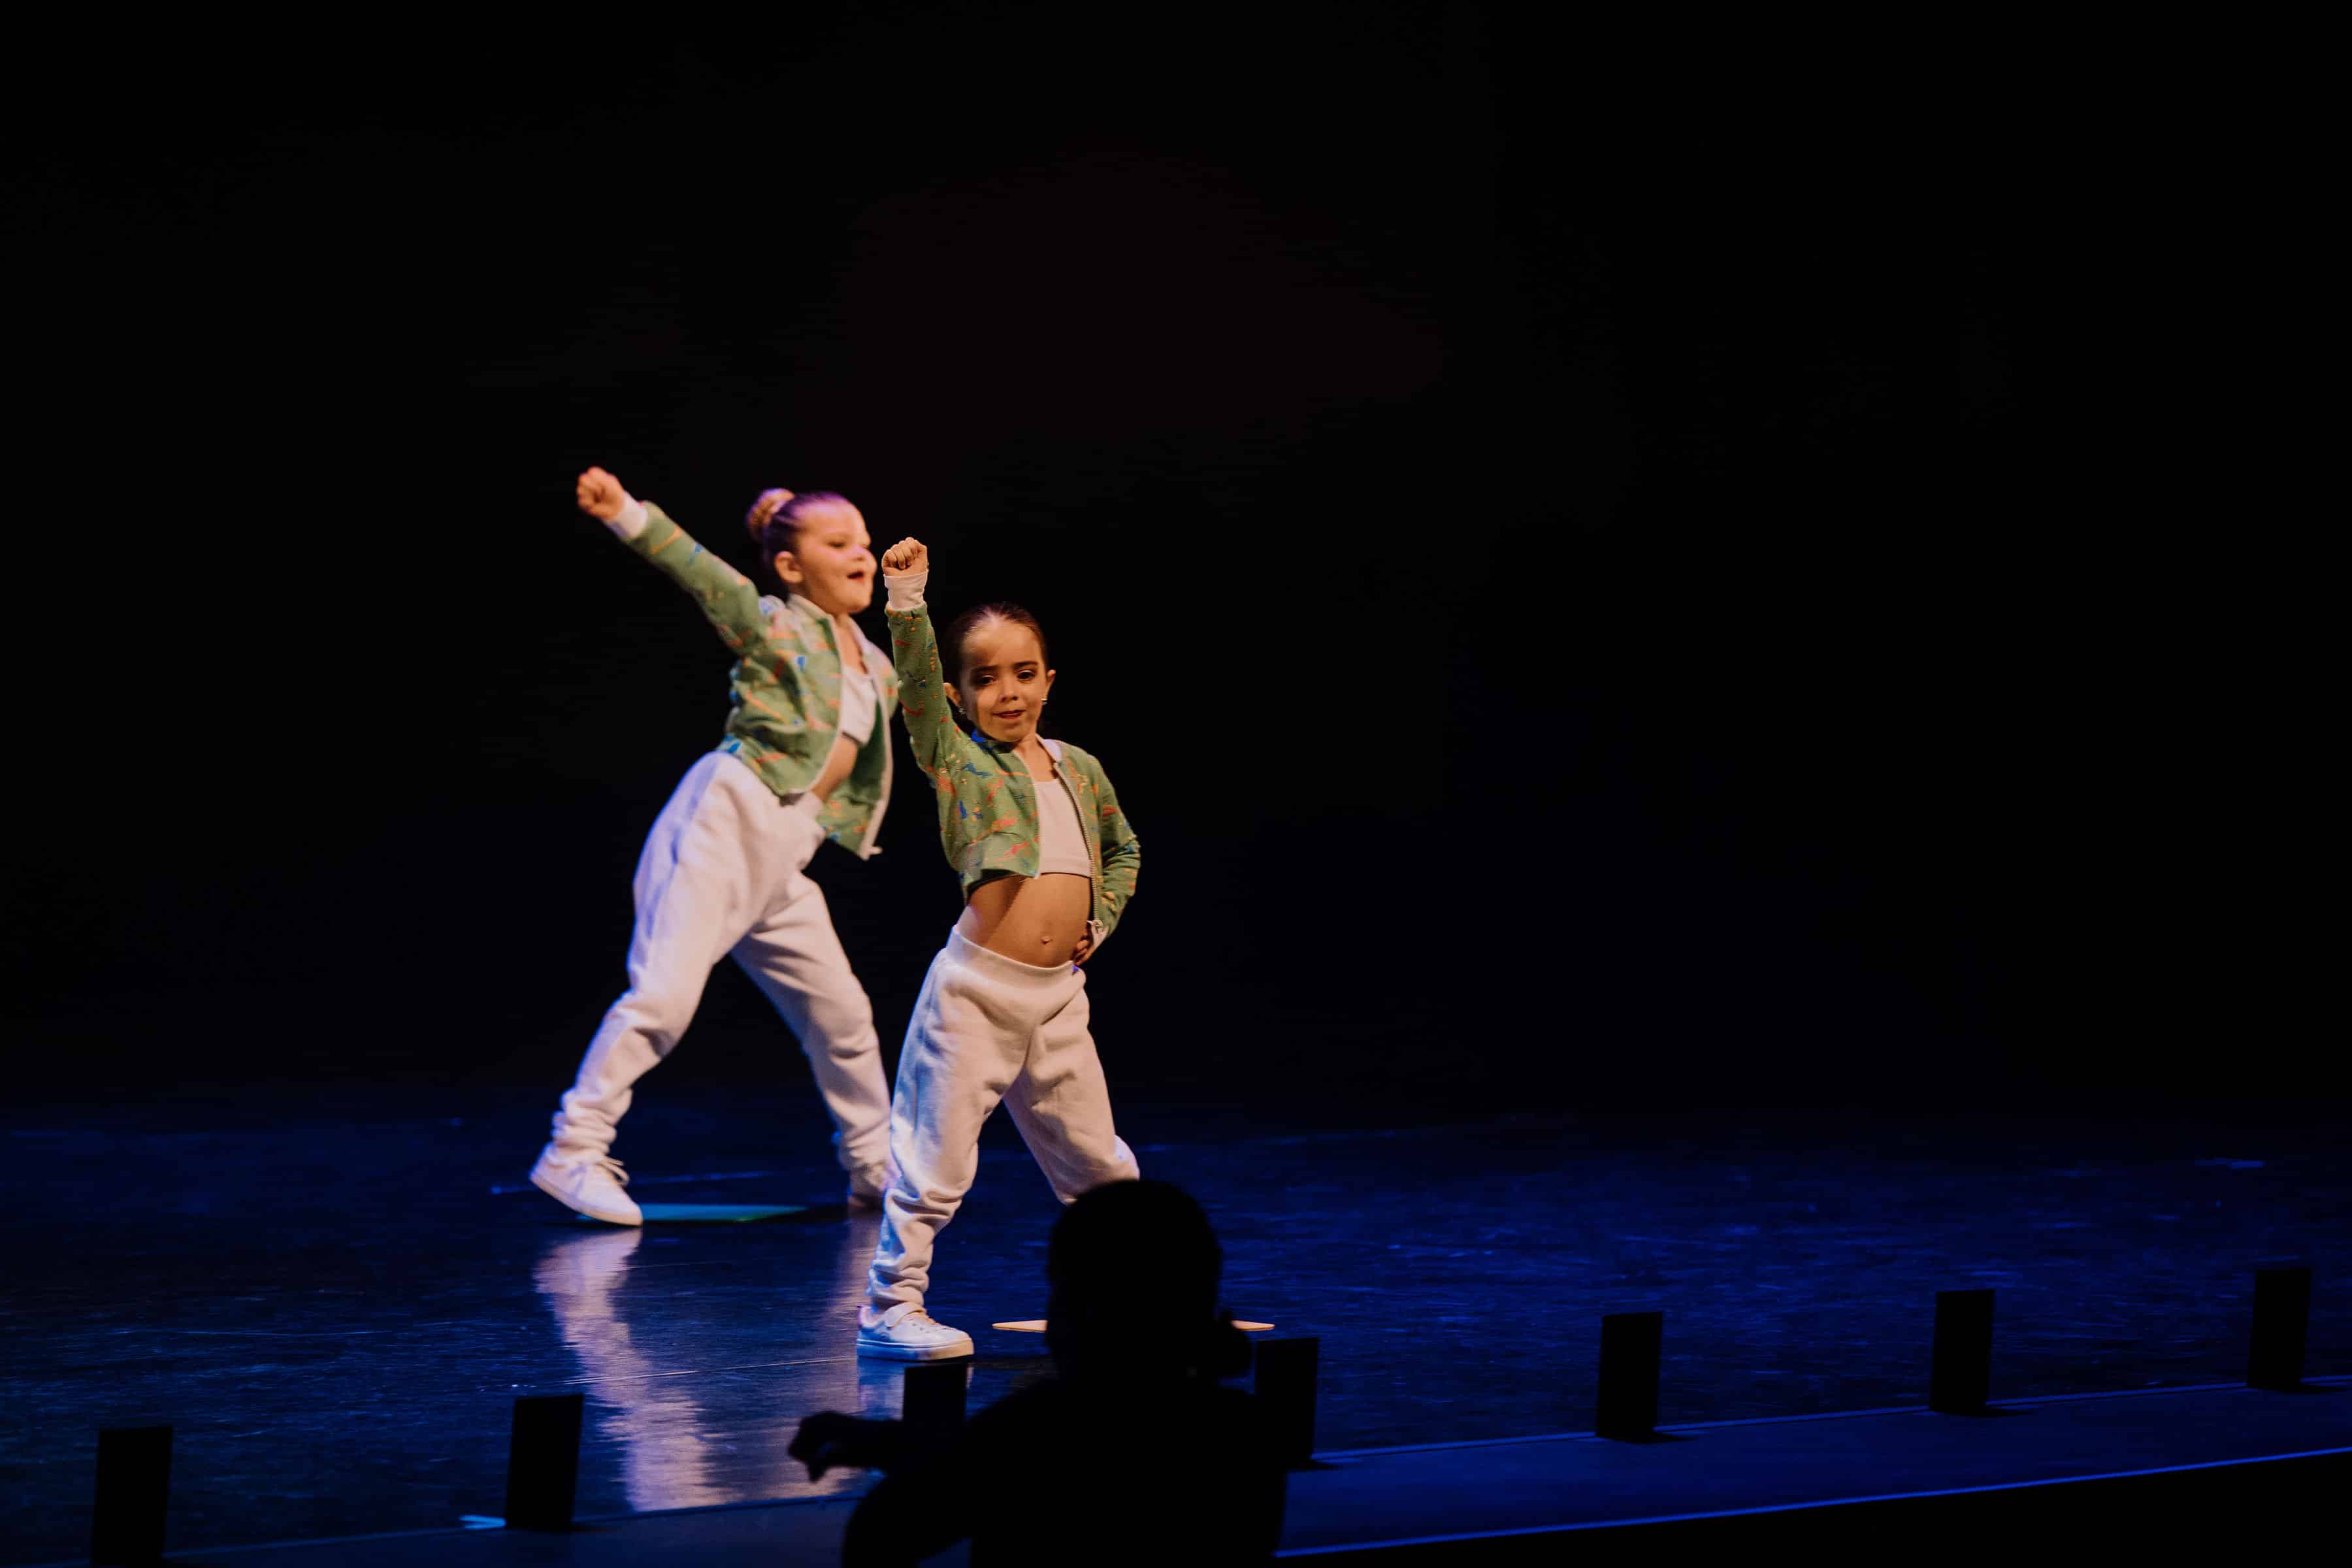 One dancer performing in a hip hop routine